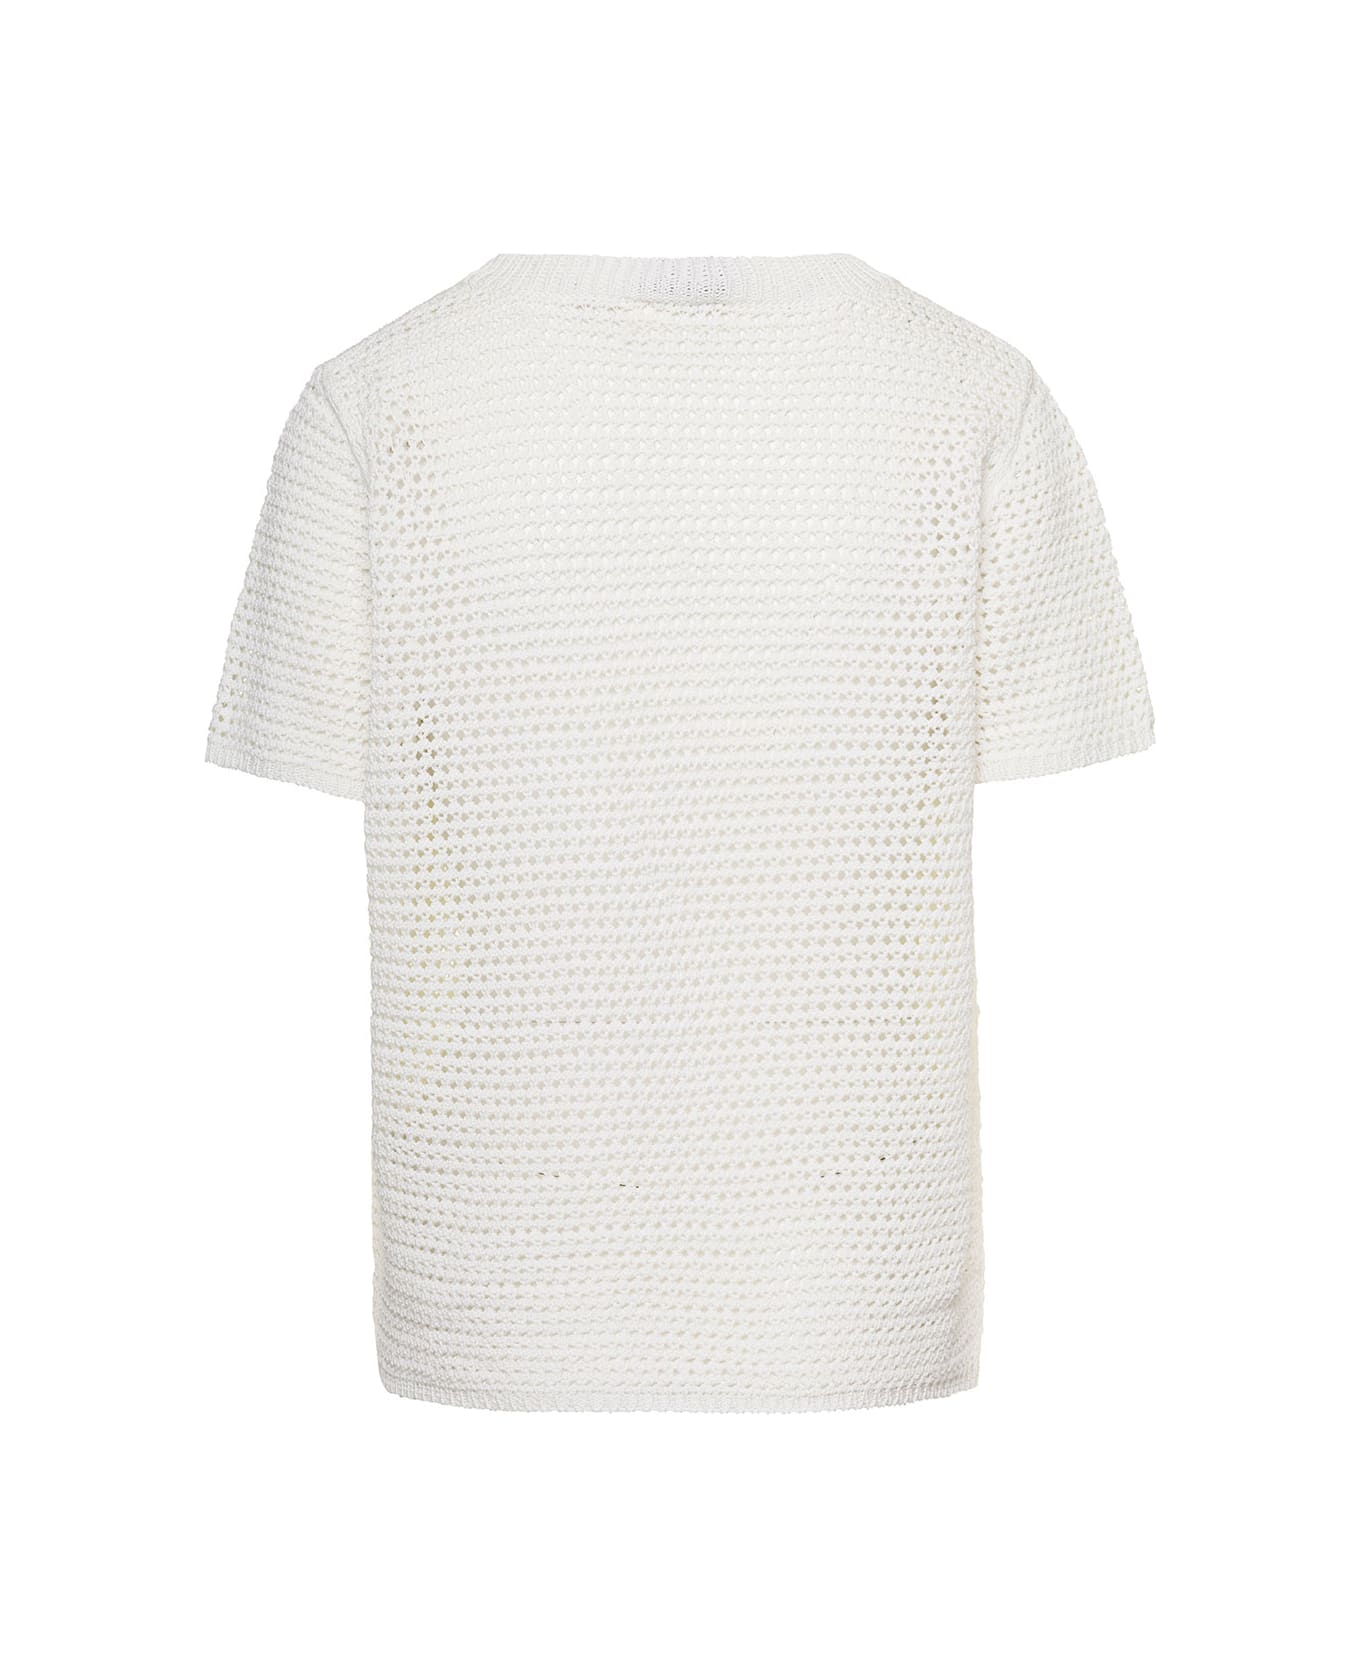 A.P.C. 'maggie' White Short-sleeve Cardigan In Crochet Woman - White